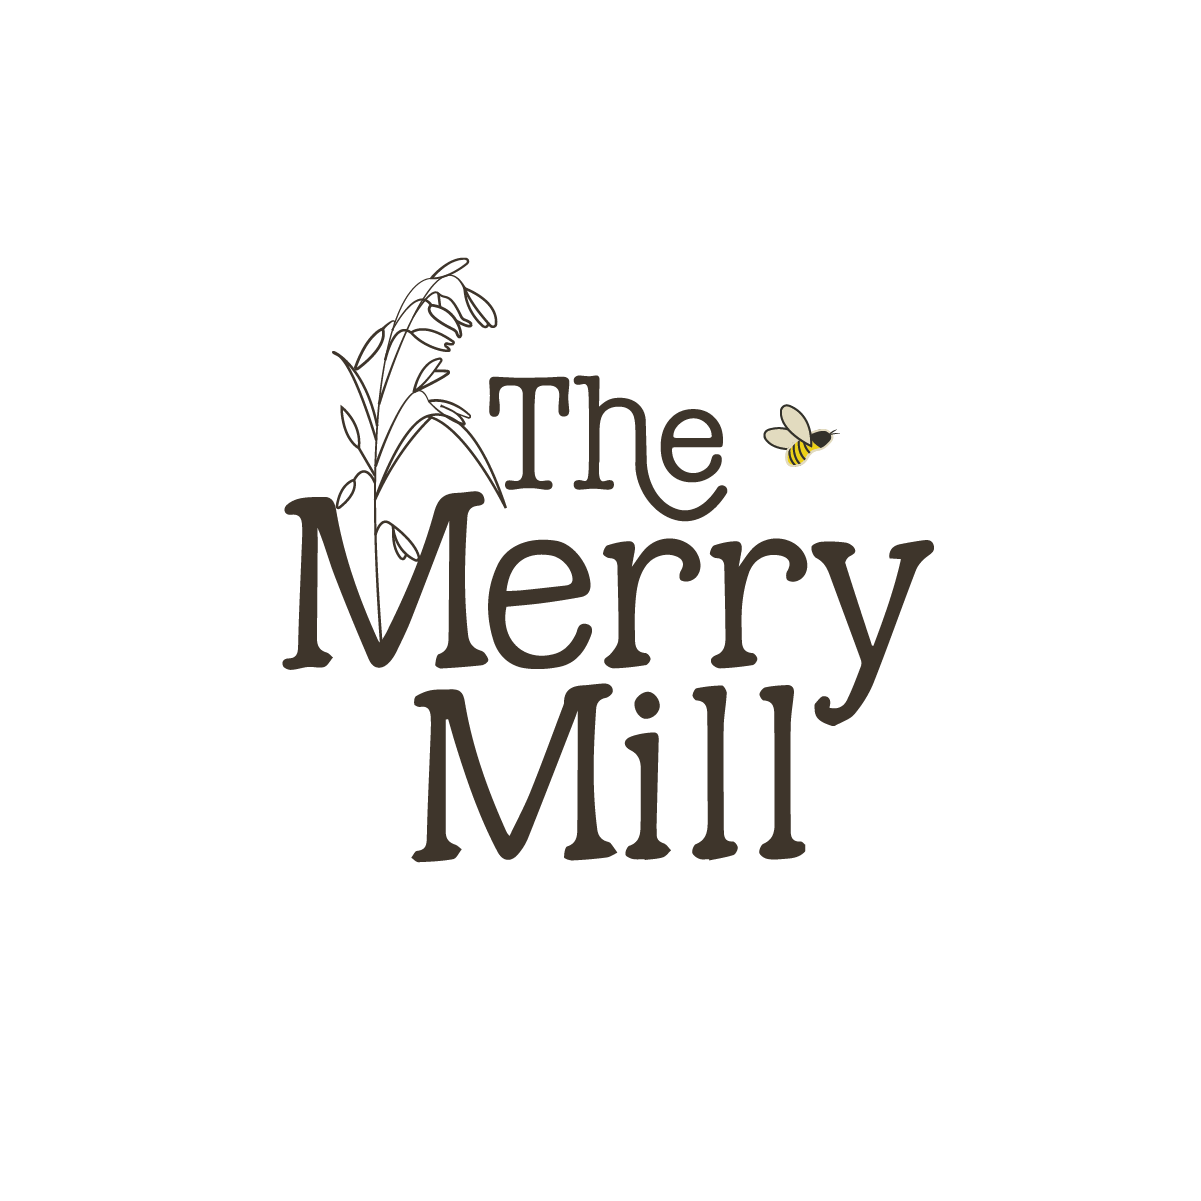 Image of The Merry Mill logotype